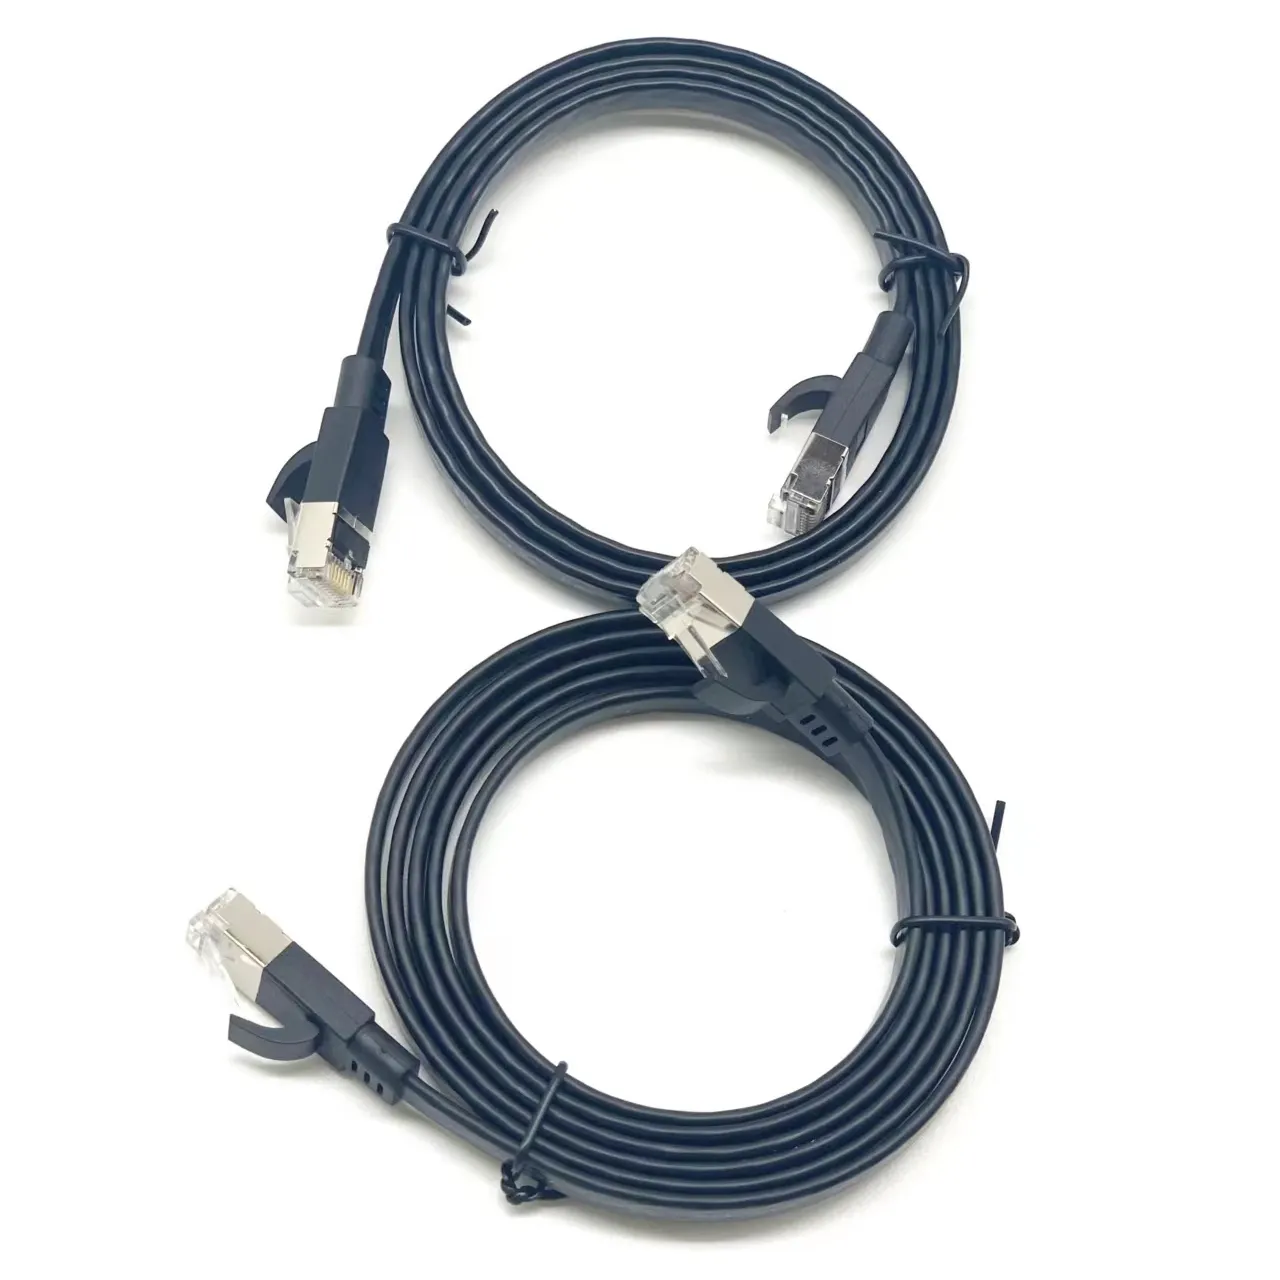 Ethernet Cable Cat7 High Speed RJ45 Network LAN Cable For PC Computer Router Wire Cables for Video Doorbell Intercom IP Camera